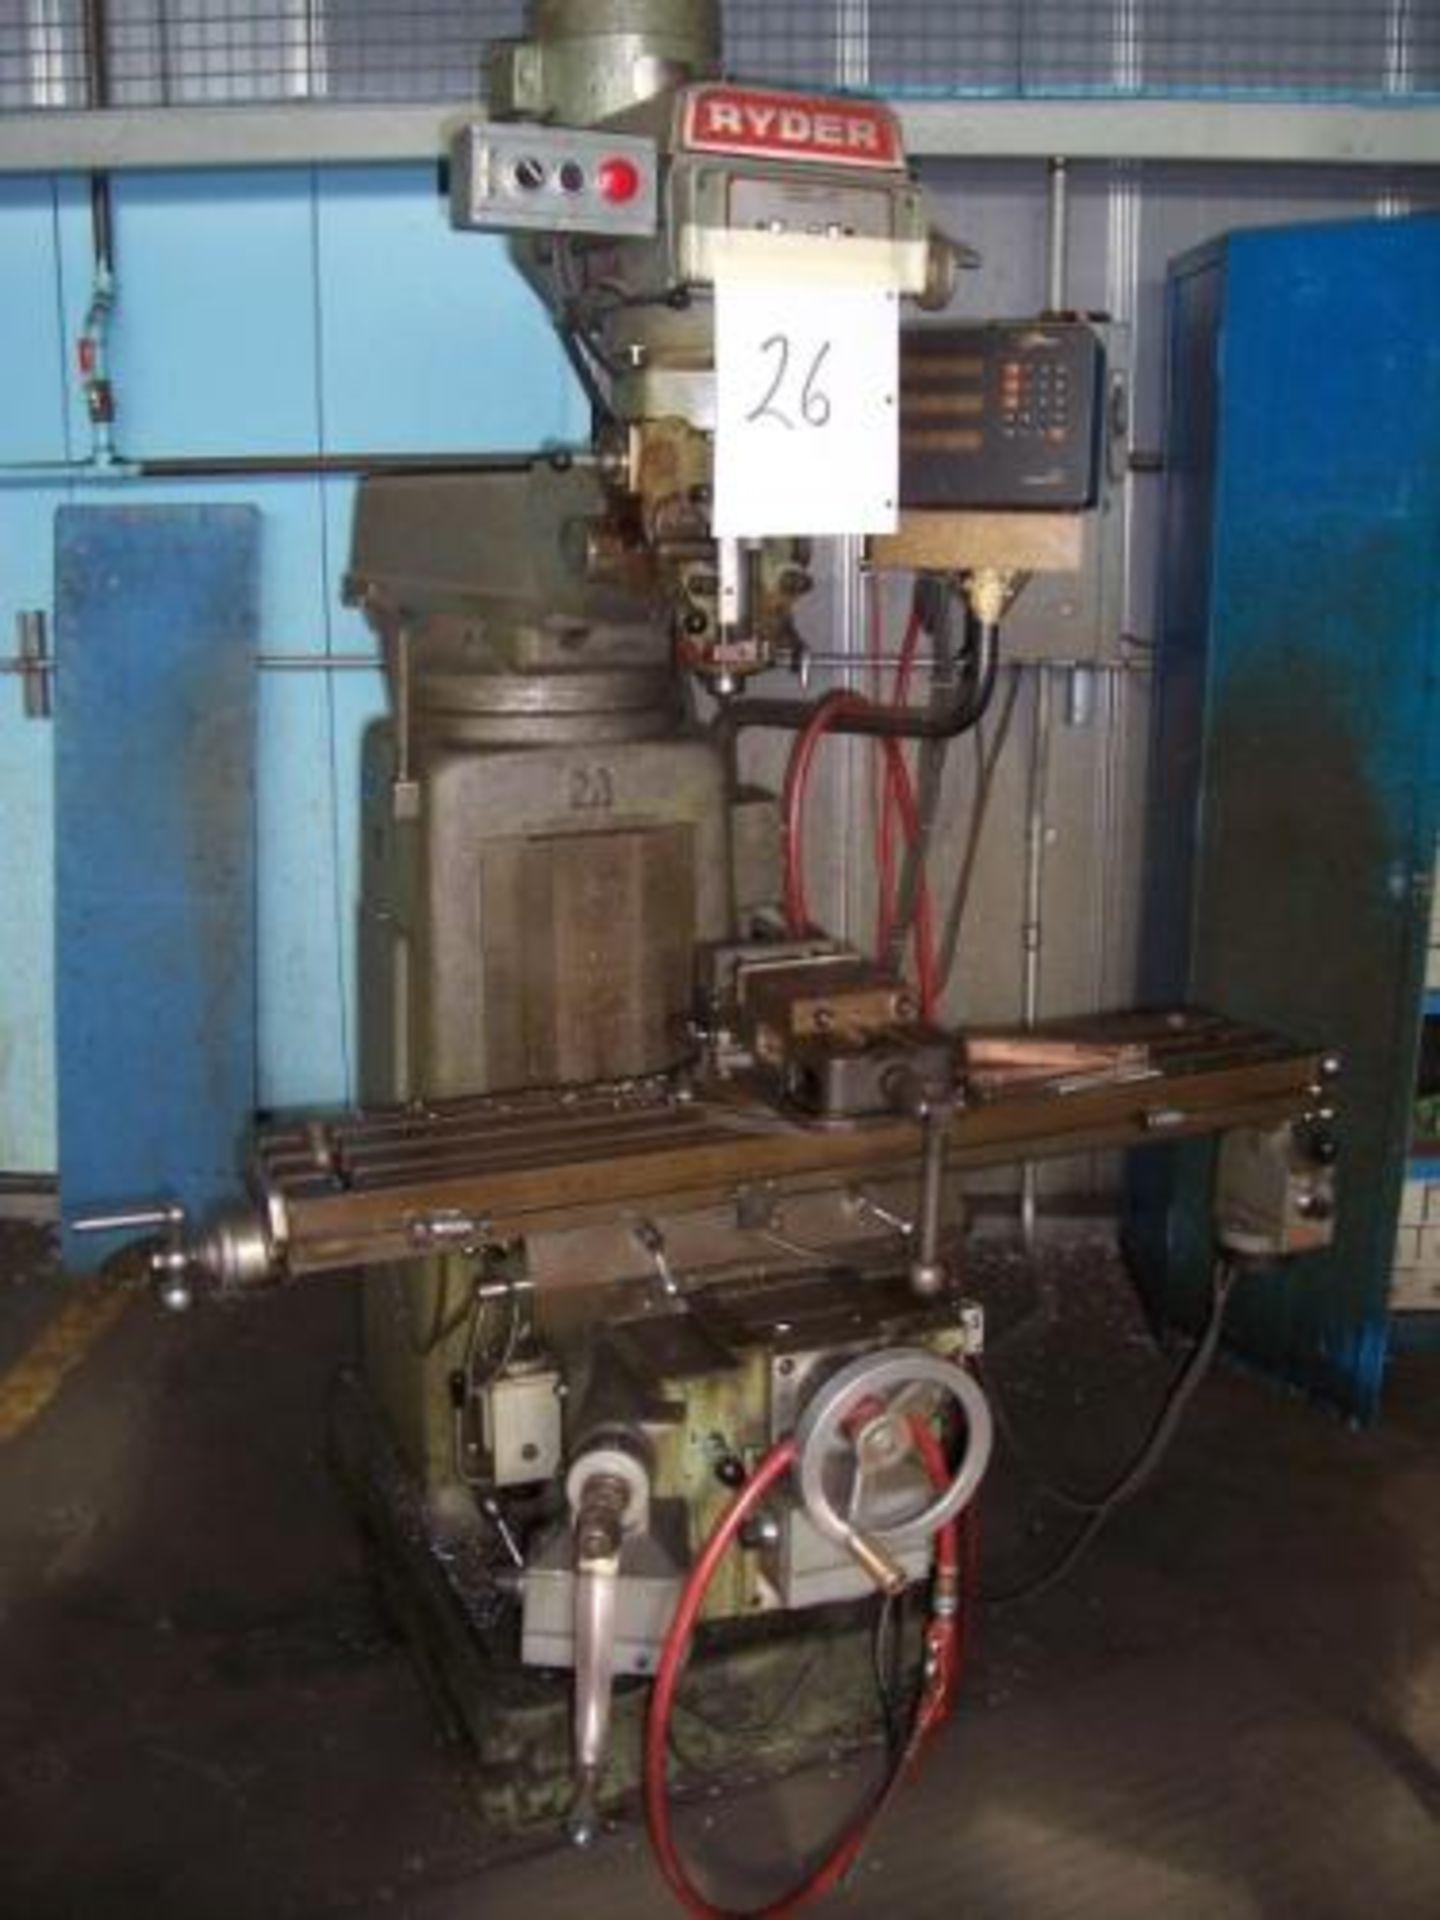 Ryder Vertical Mill, 10" x 50", Mdl: 3VH, S/N: 73315, Located In: Huntington Park, CA